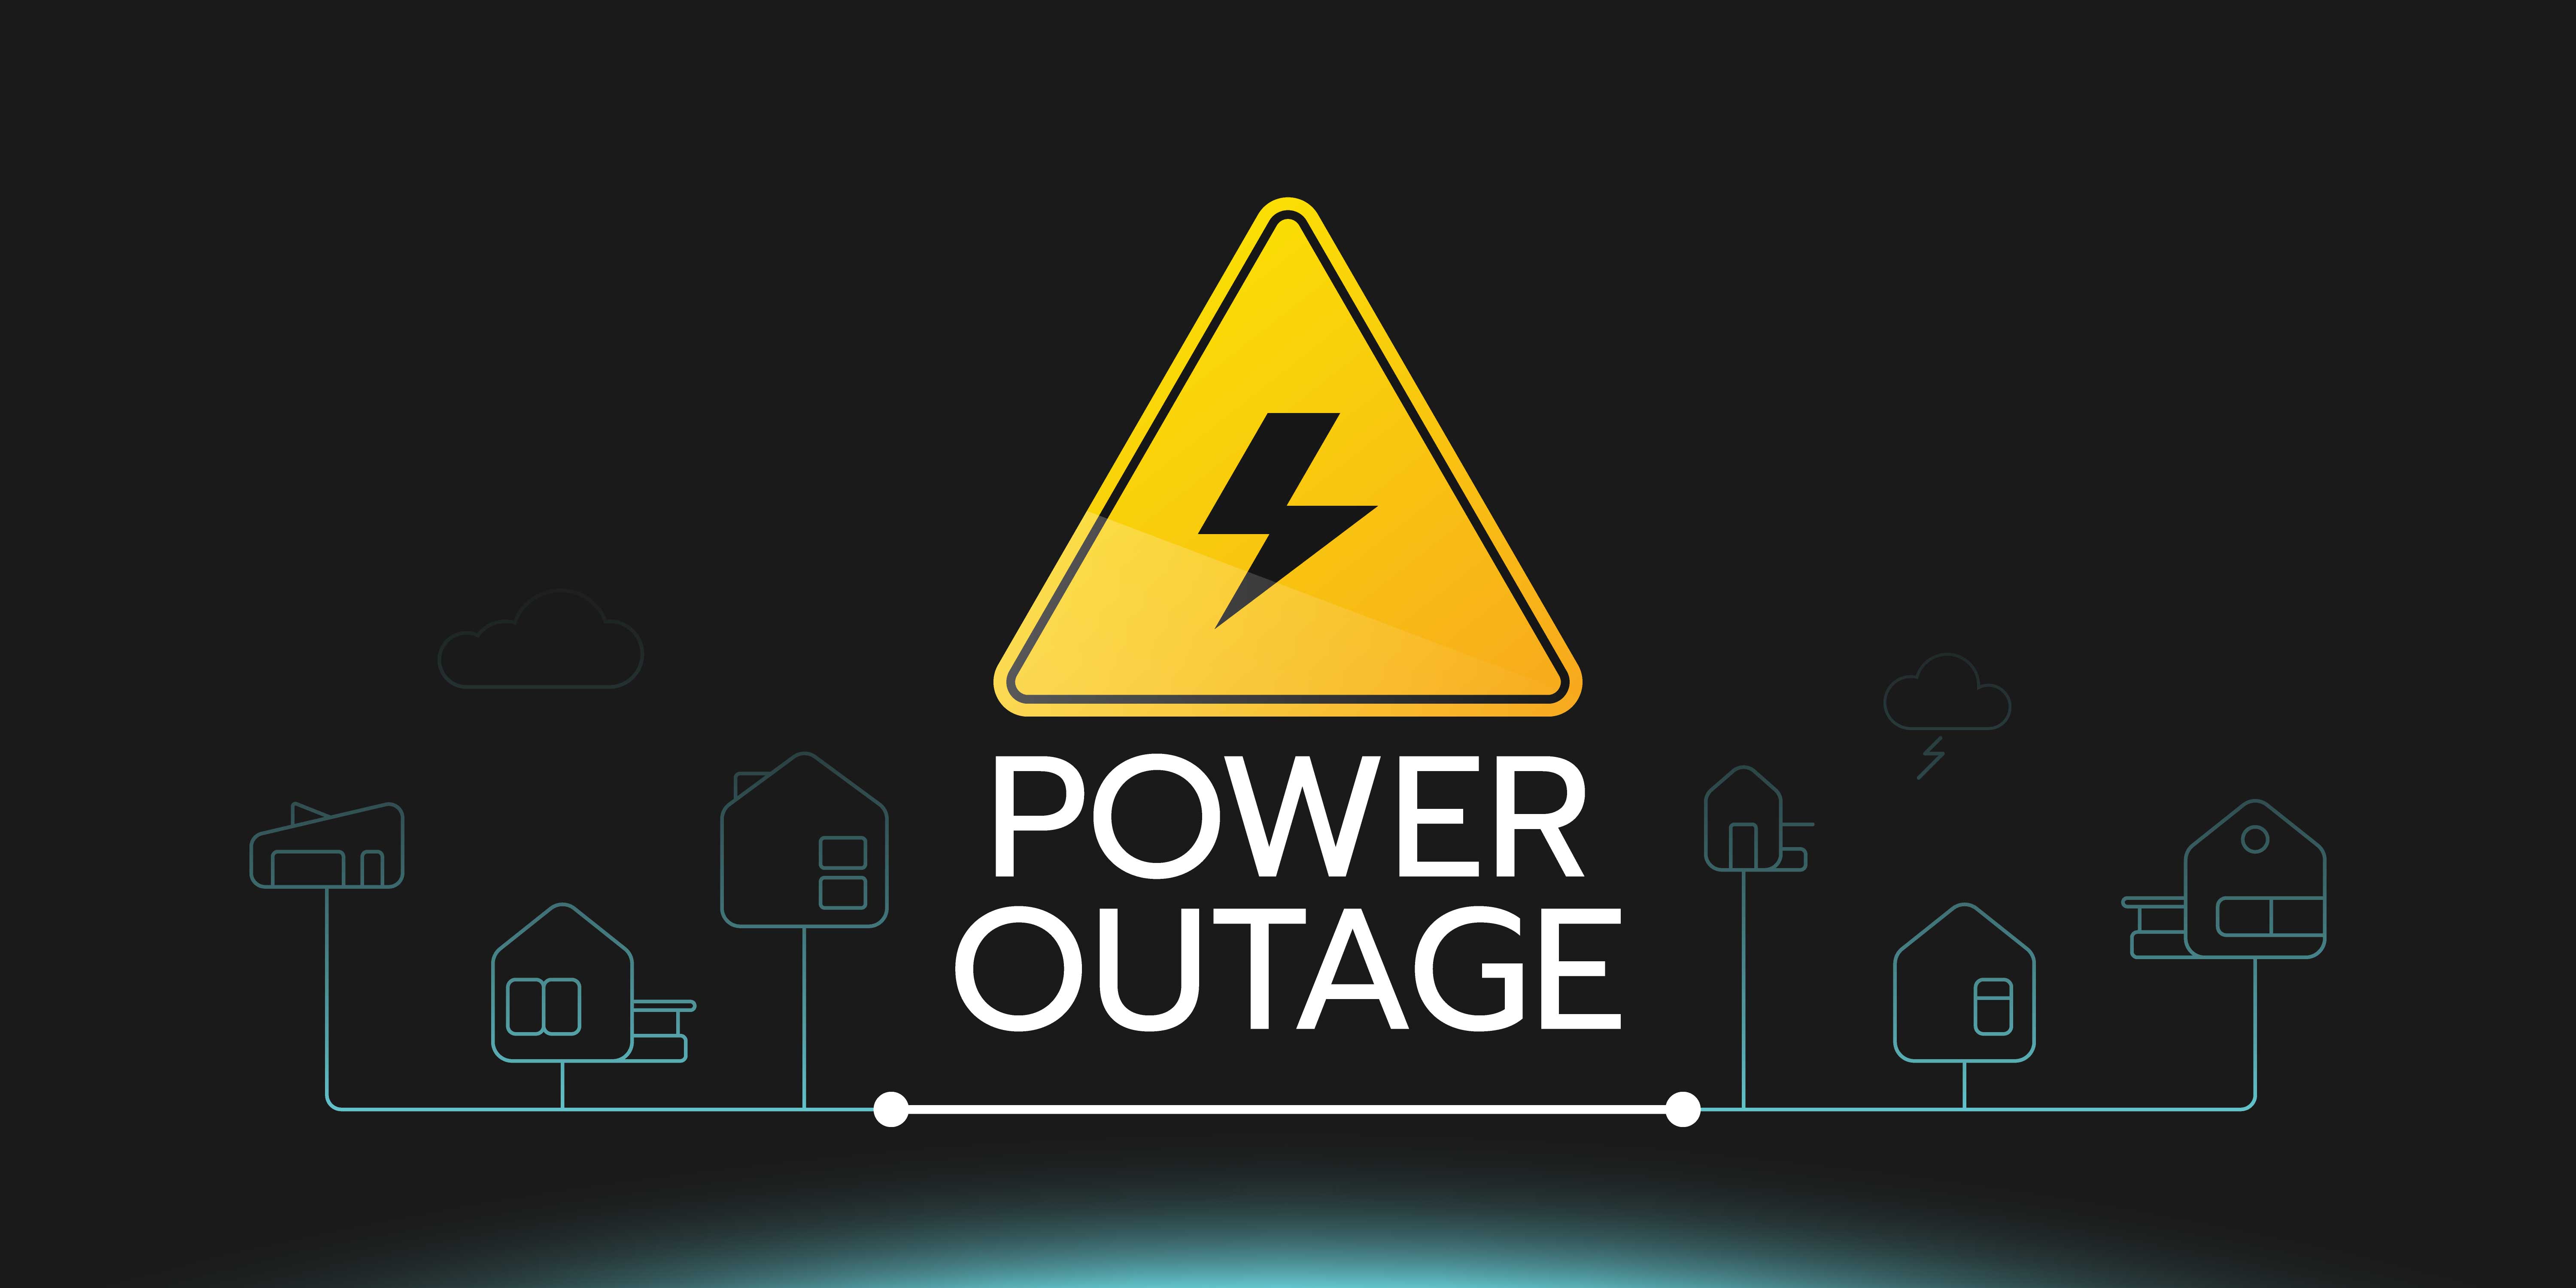 Can your server room handle a power outage?